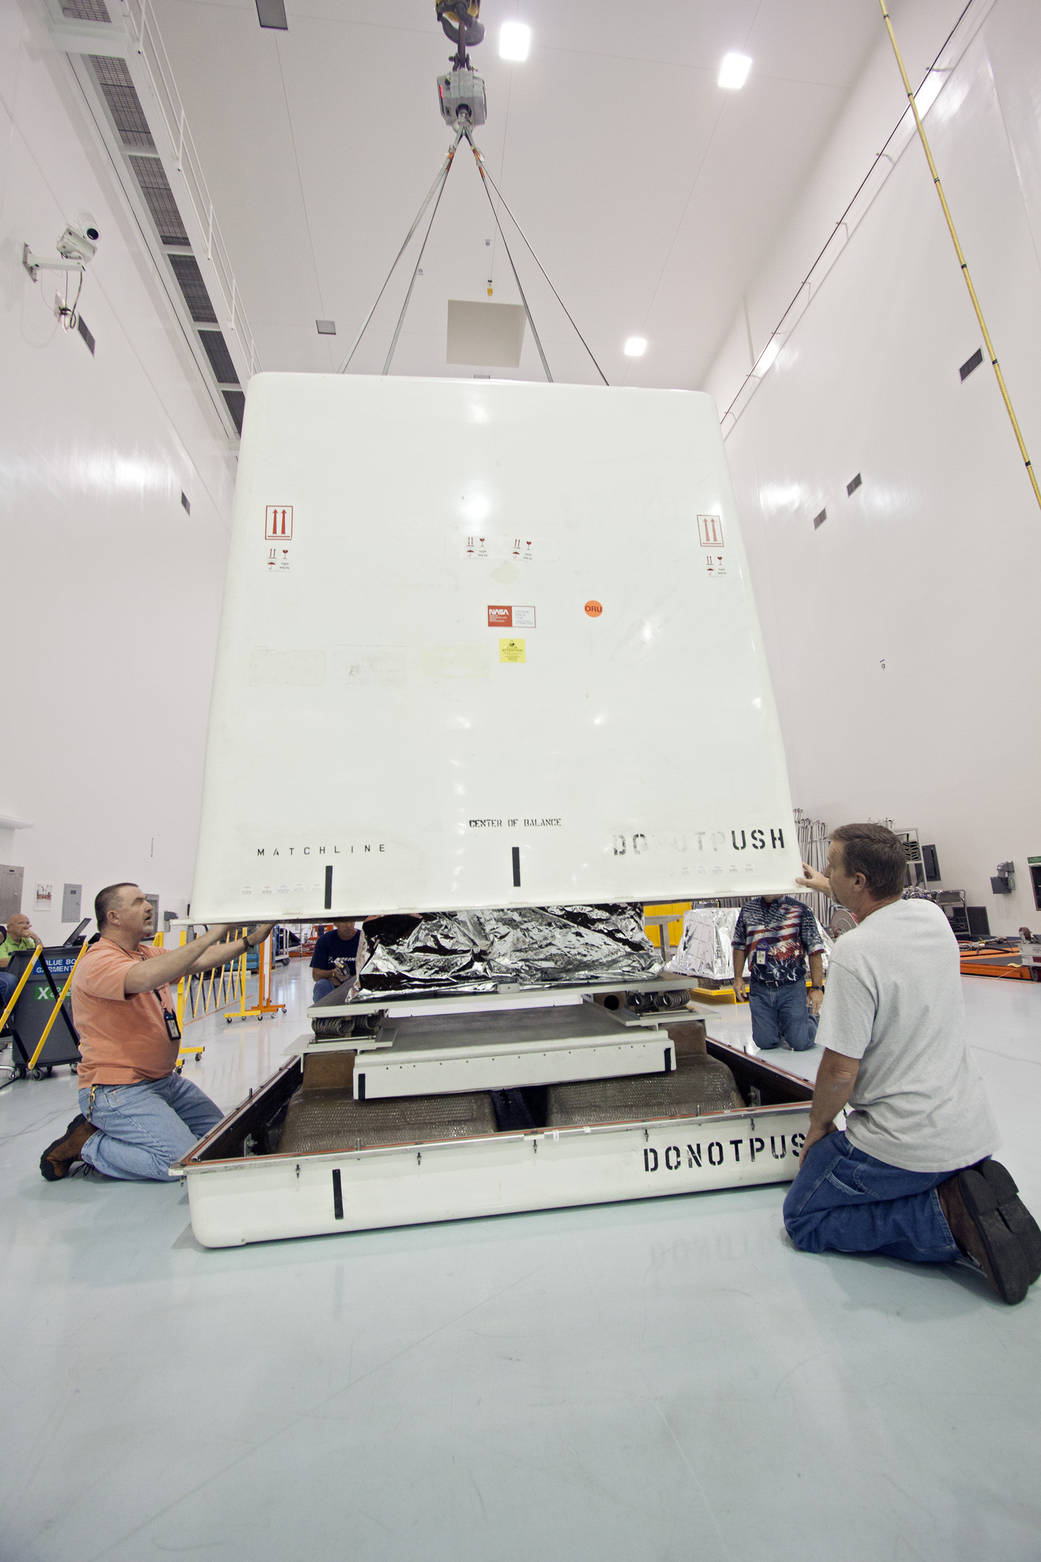 Technicians finish lowering the cover of a shipping container that will enclose the orbital replacement unit for the space stati